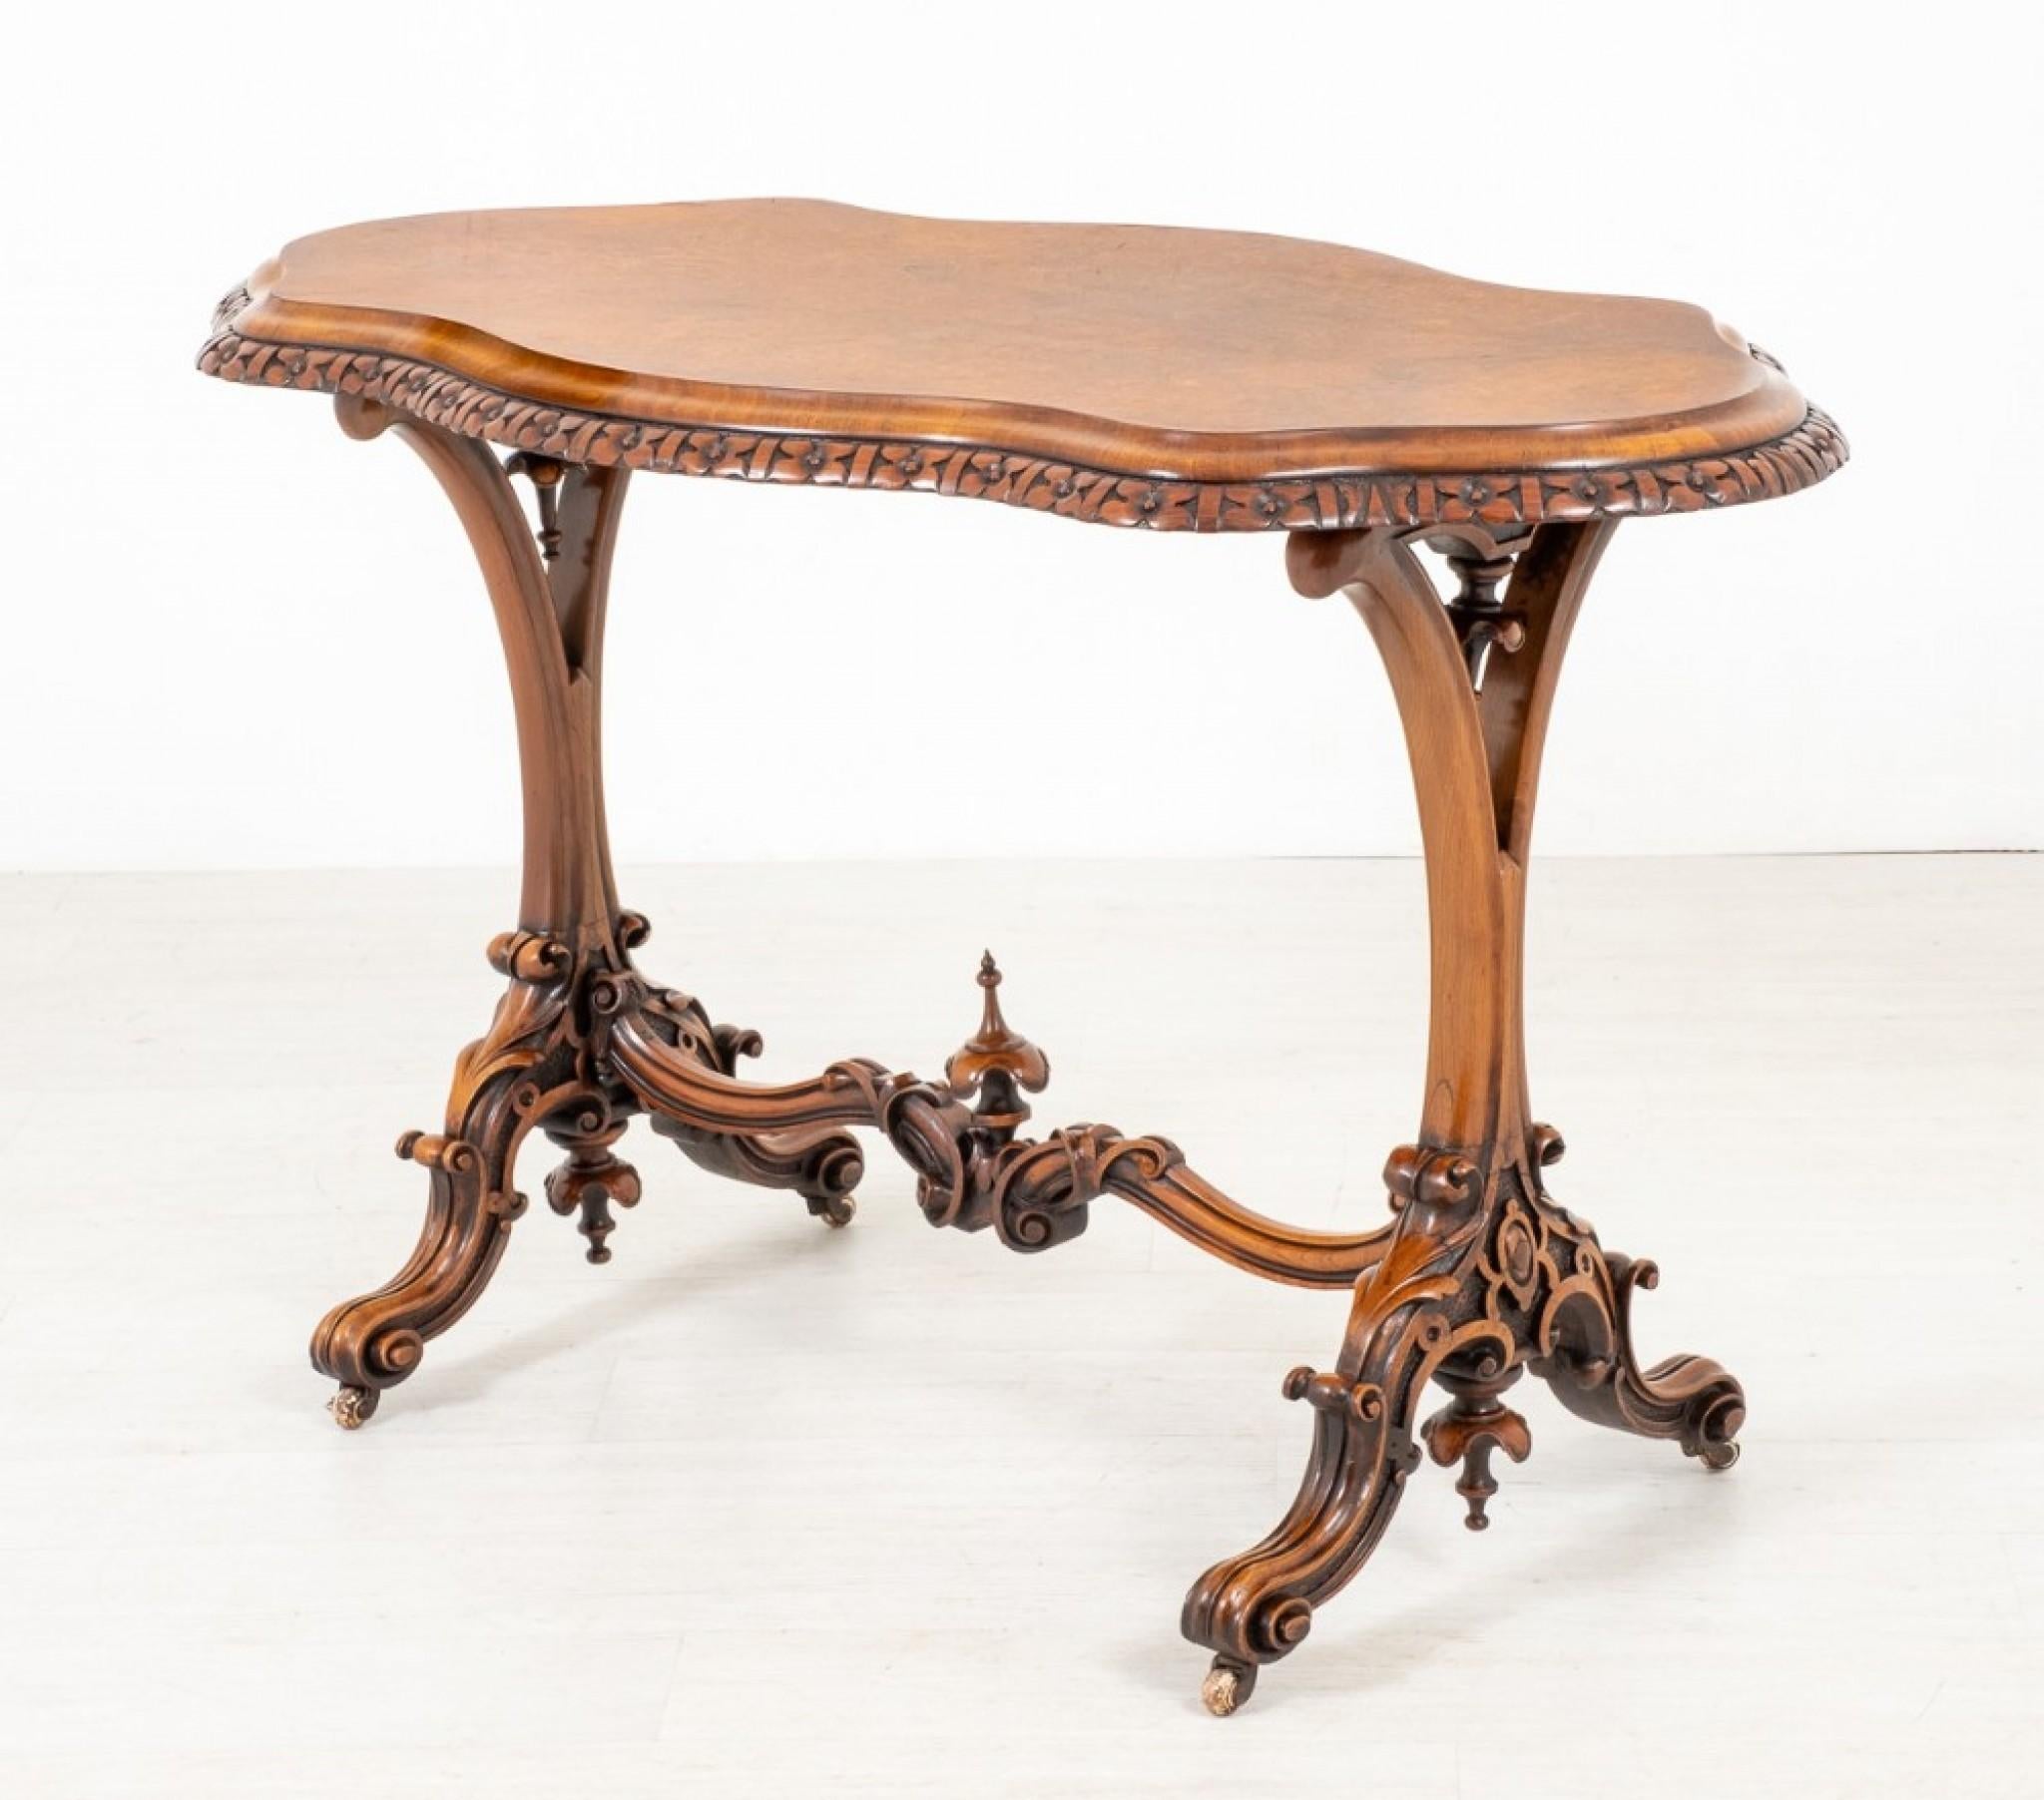 Victorian Stretcher Table, Antique Walnut Side Table 1860 For Sale 5